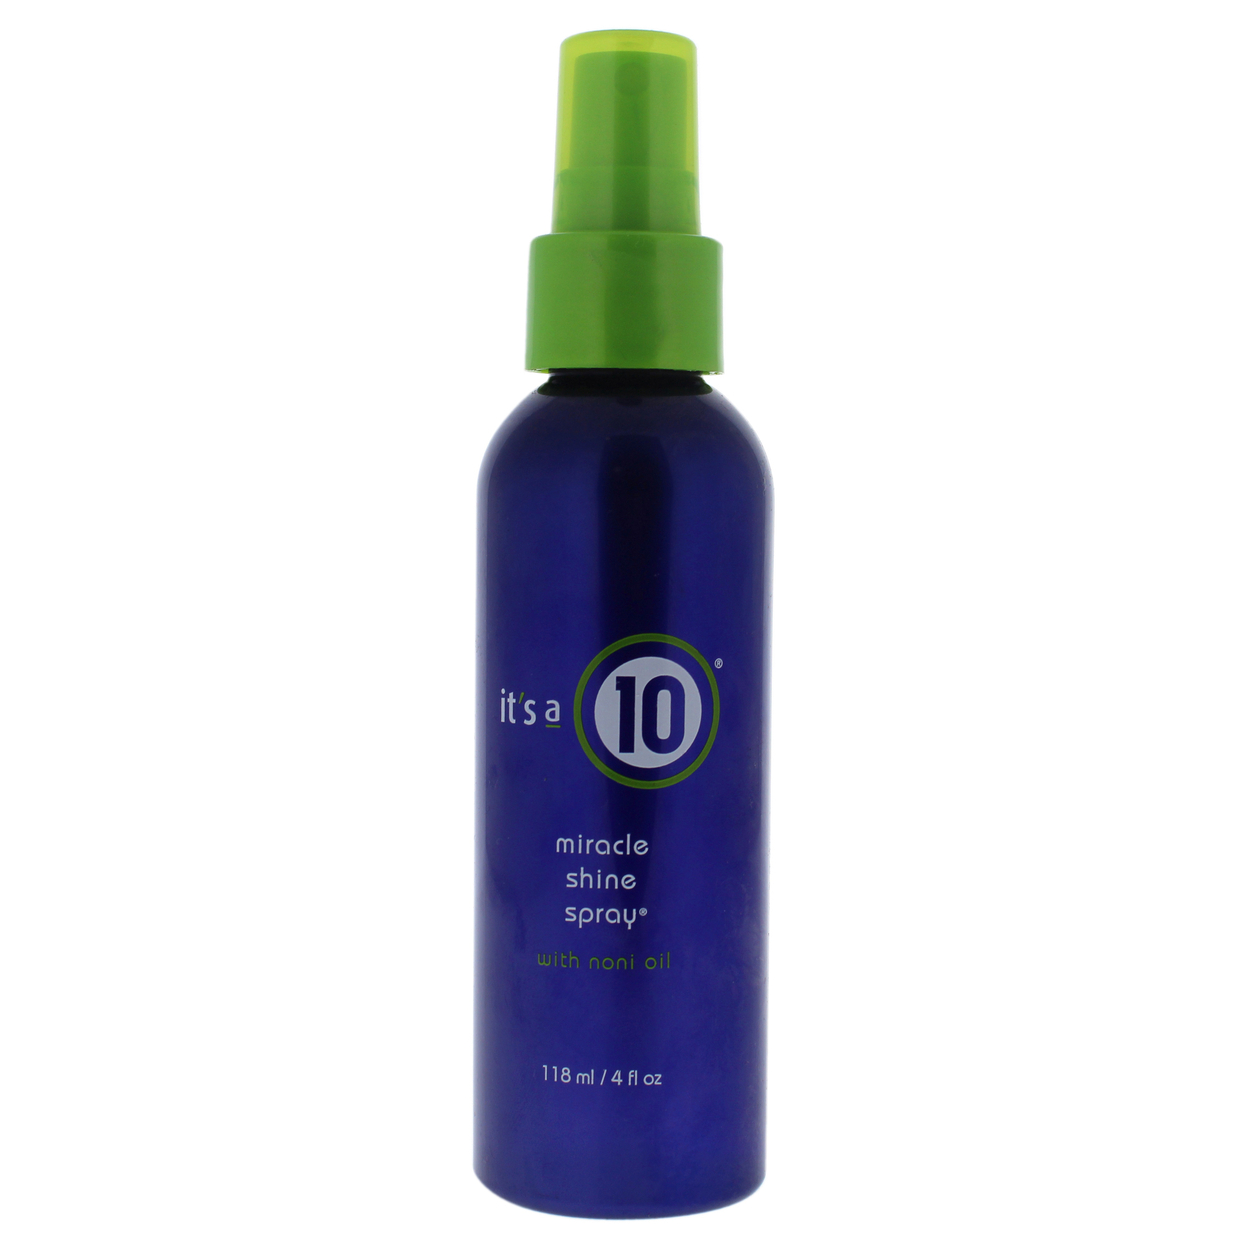 It's A 10 Unisex HAIRCARE Miracle Shine Spray 4 Oz